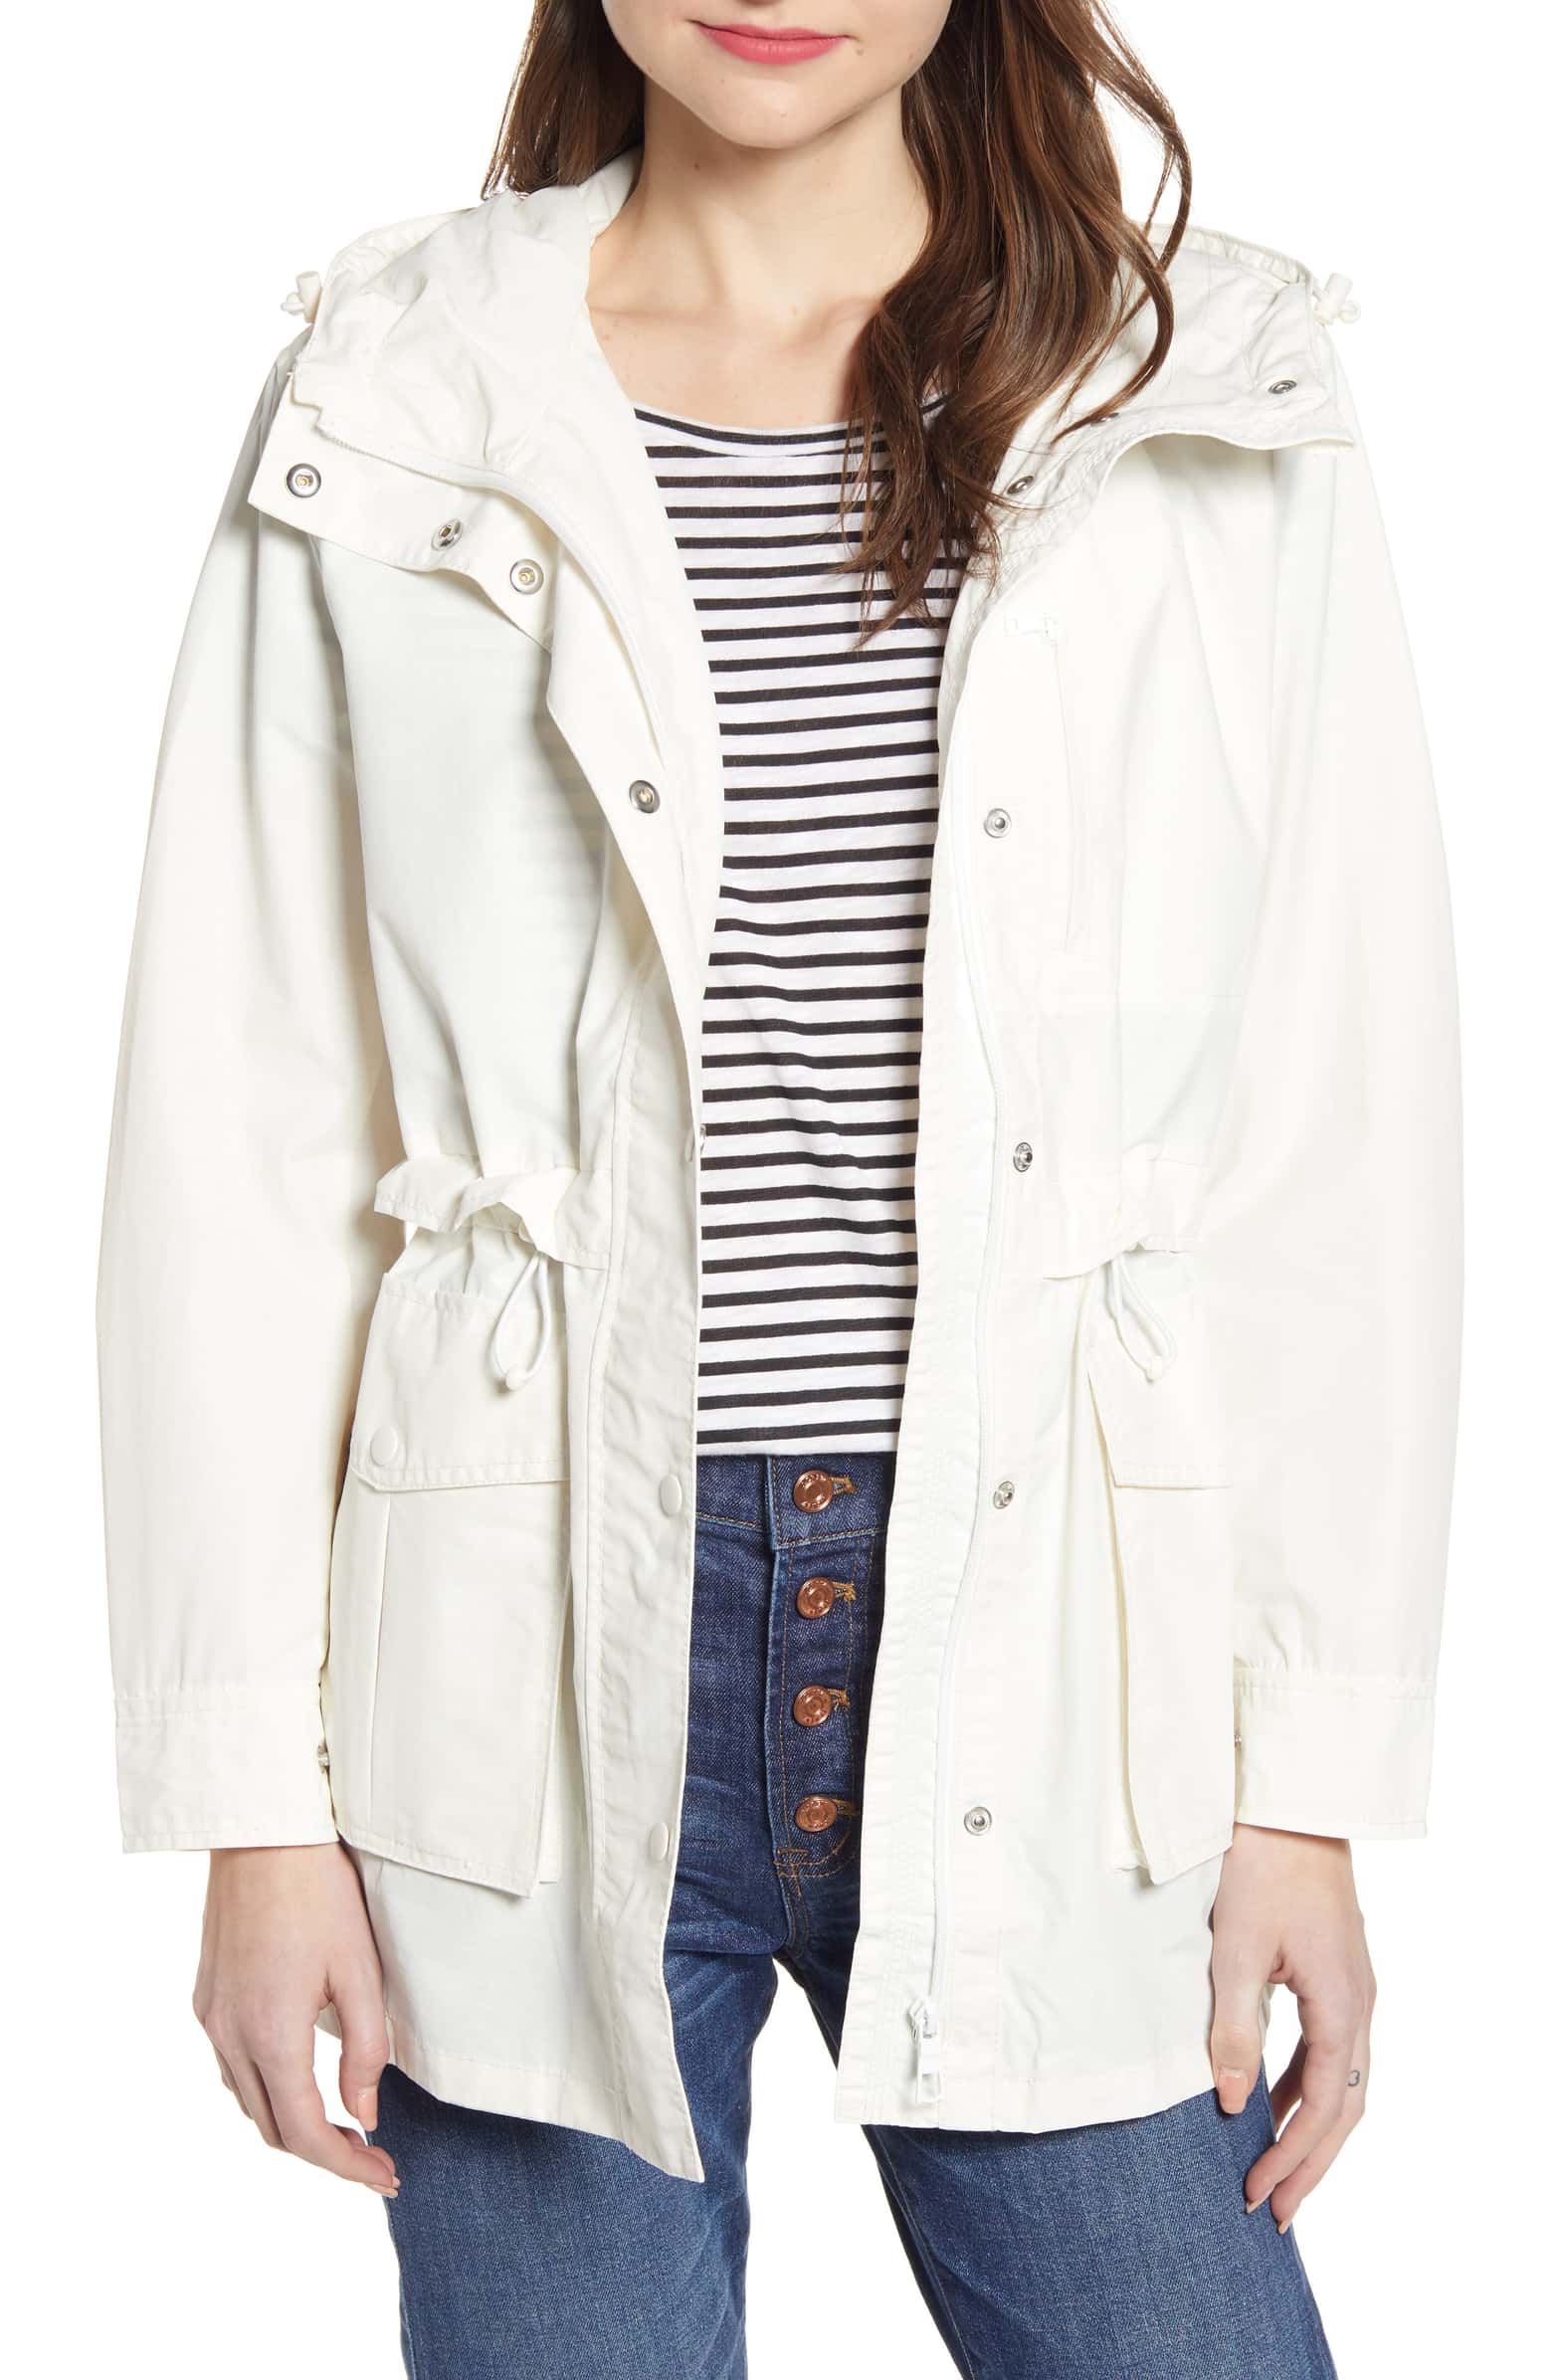 Strike The Rainy Blues Away With a Knockout Look For Less - WWTNT